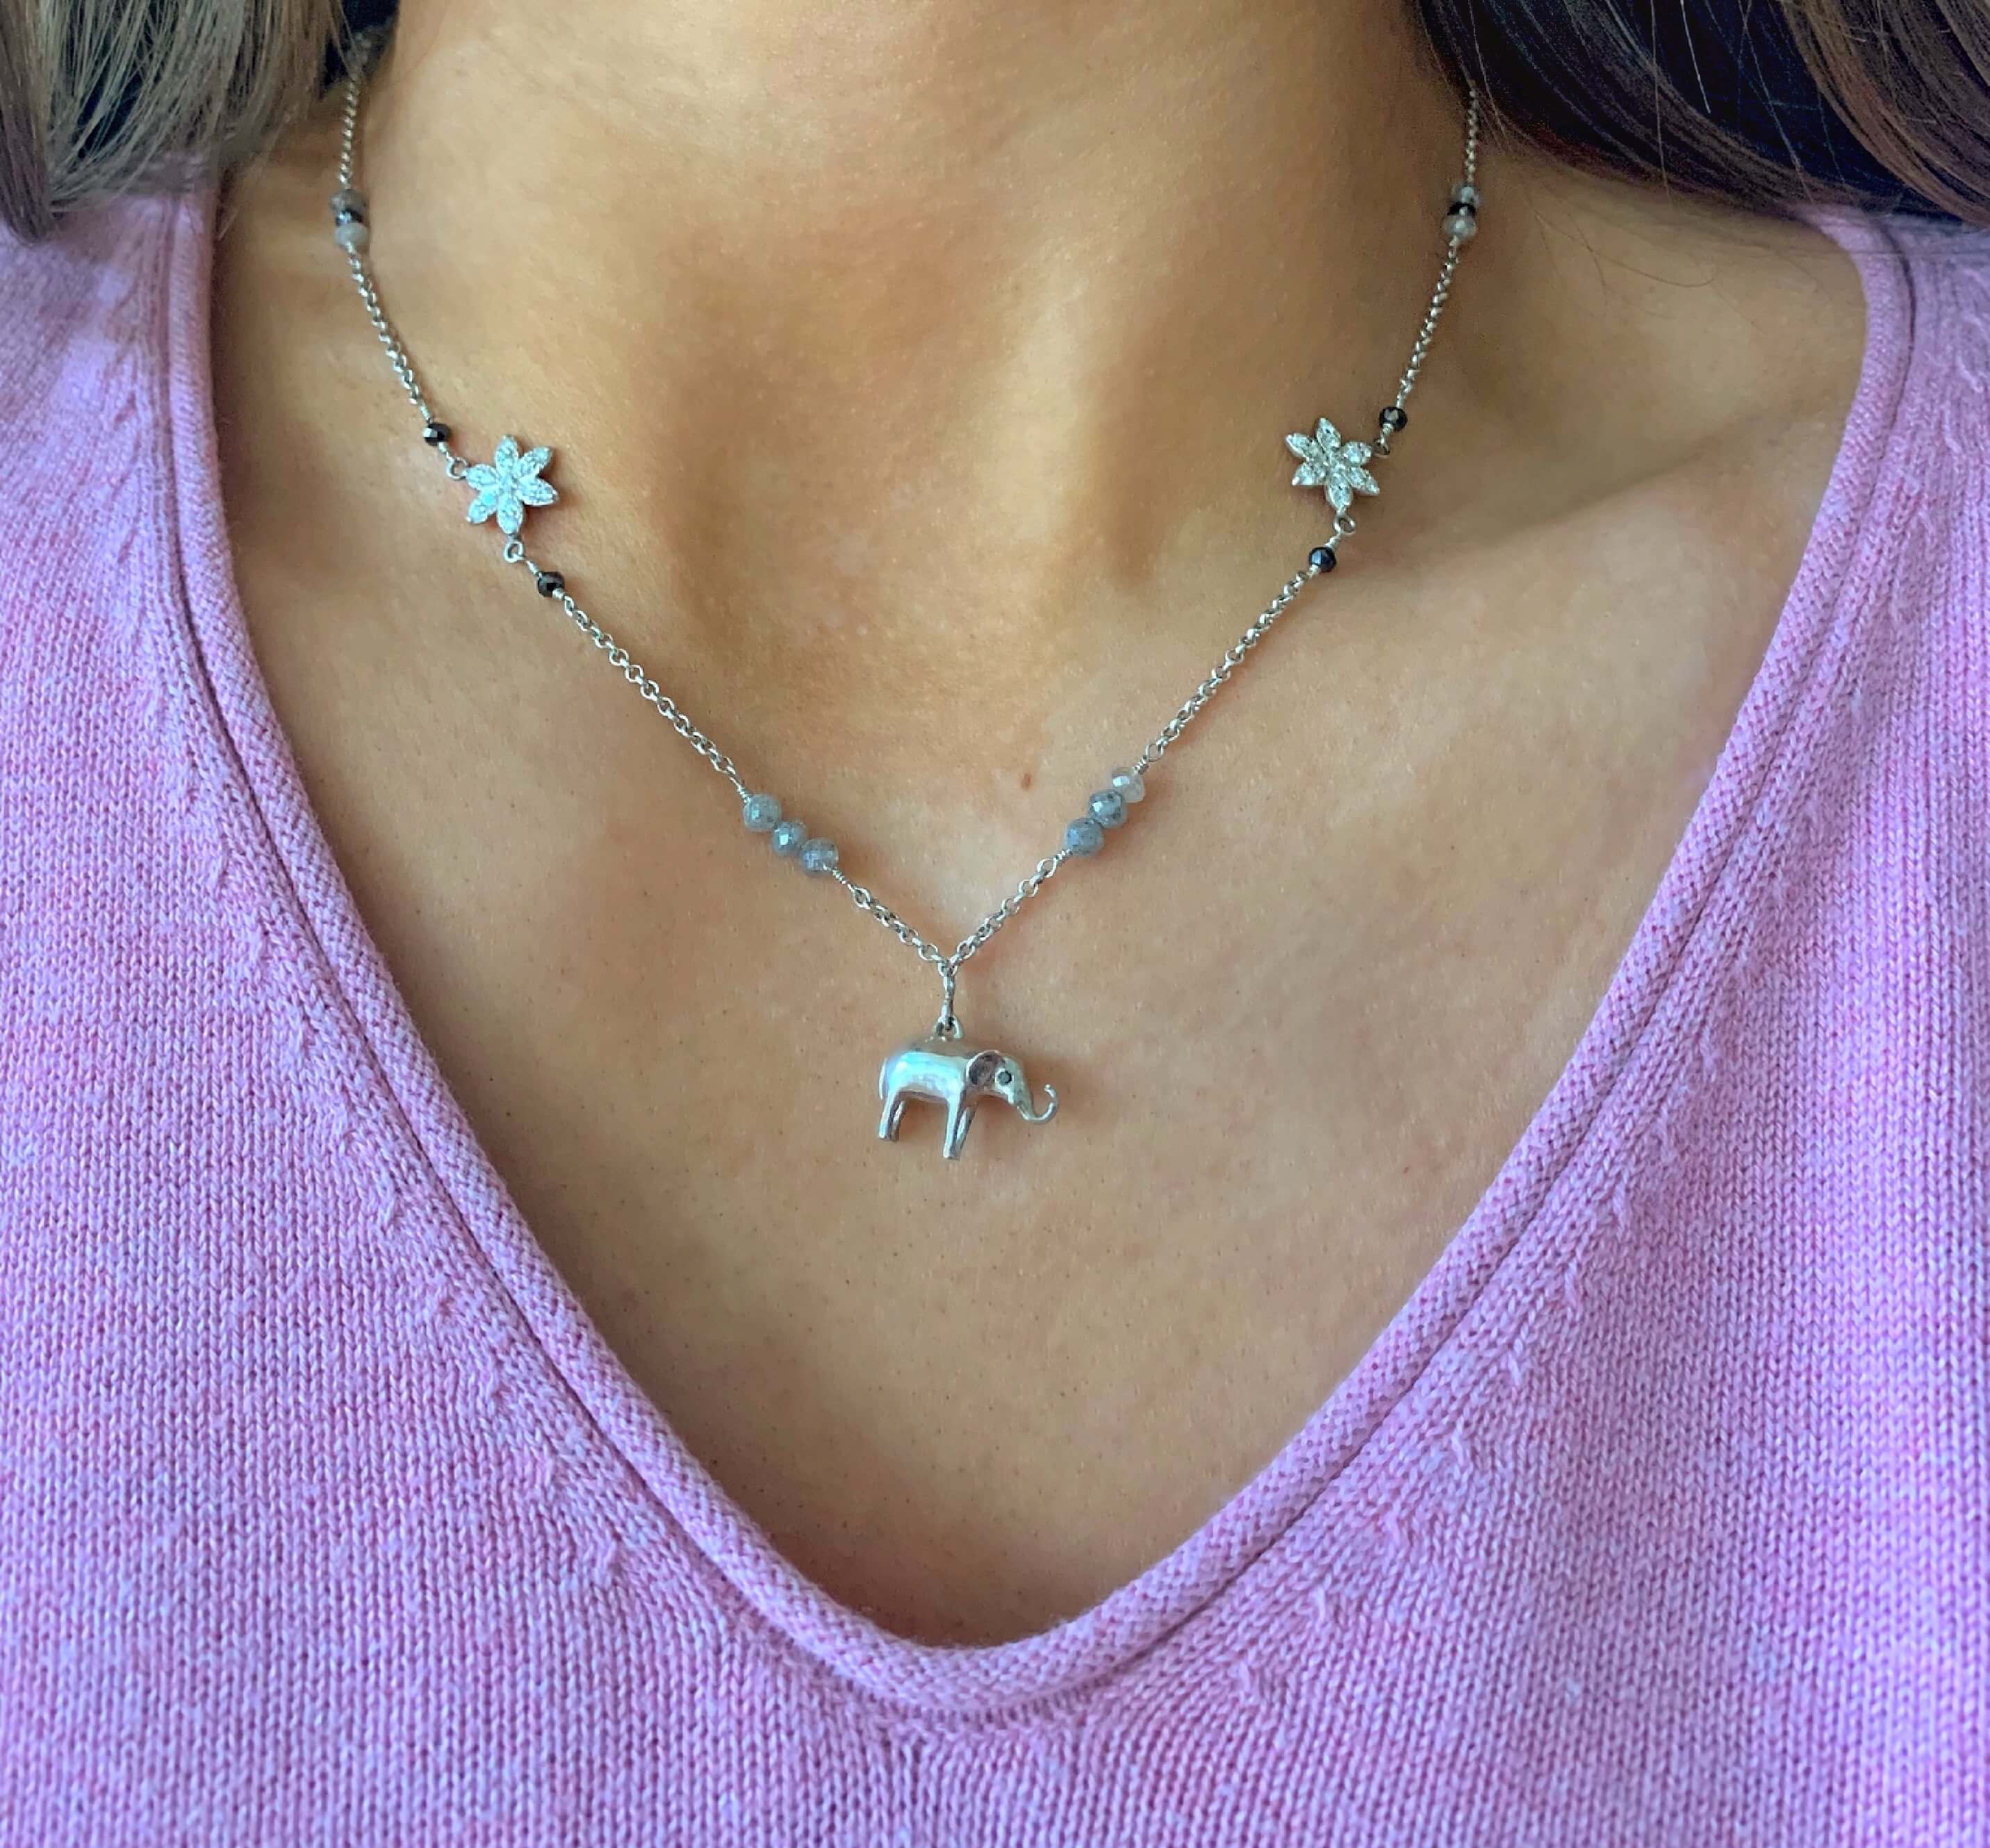 Moonflower Charm Necklace